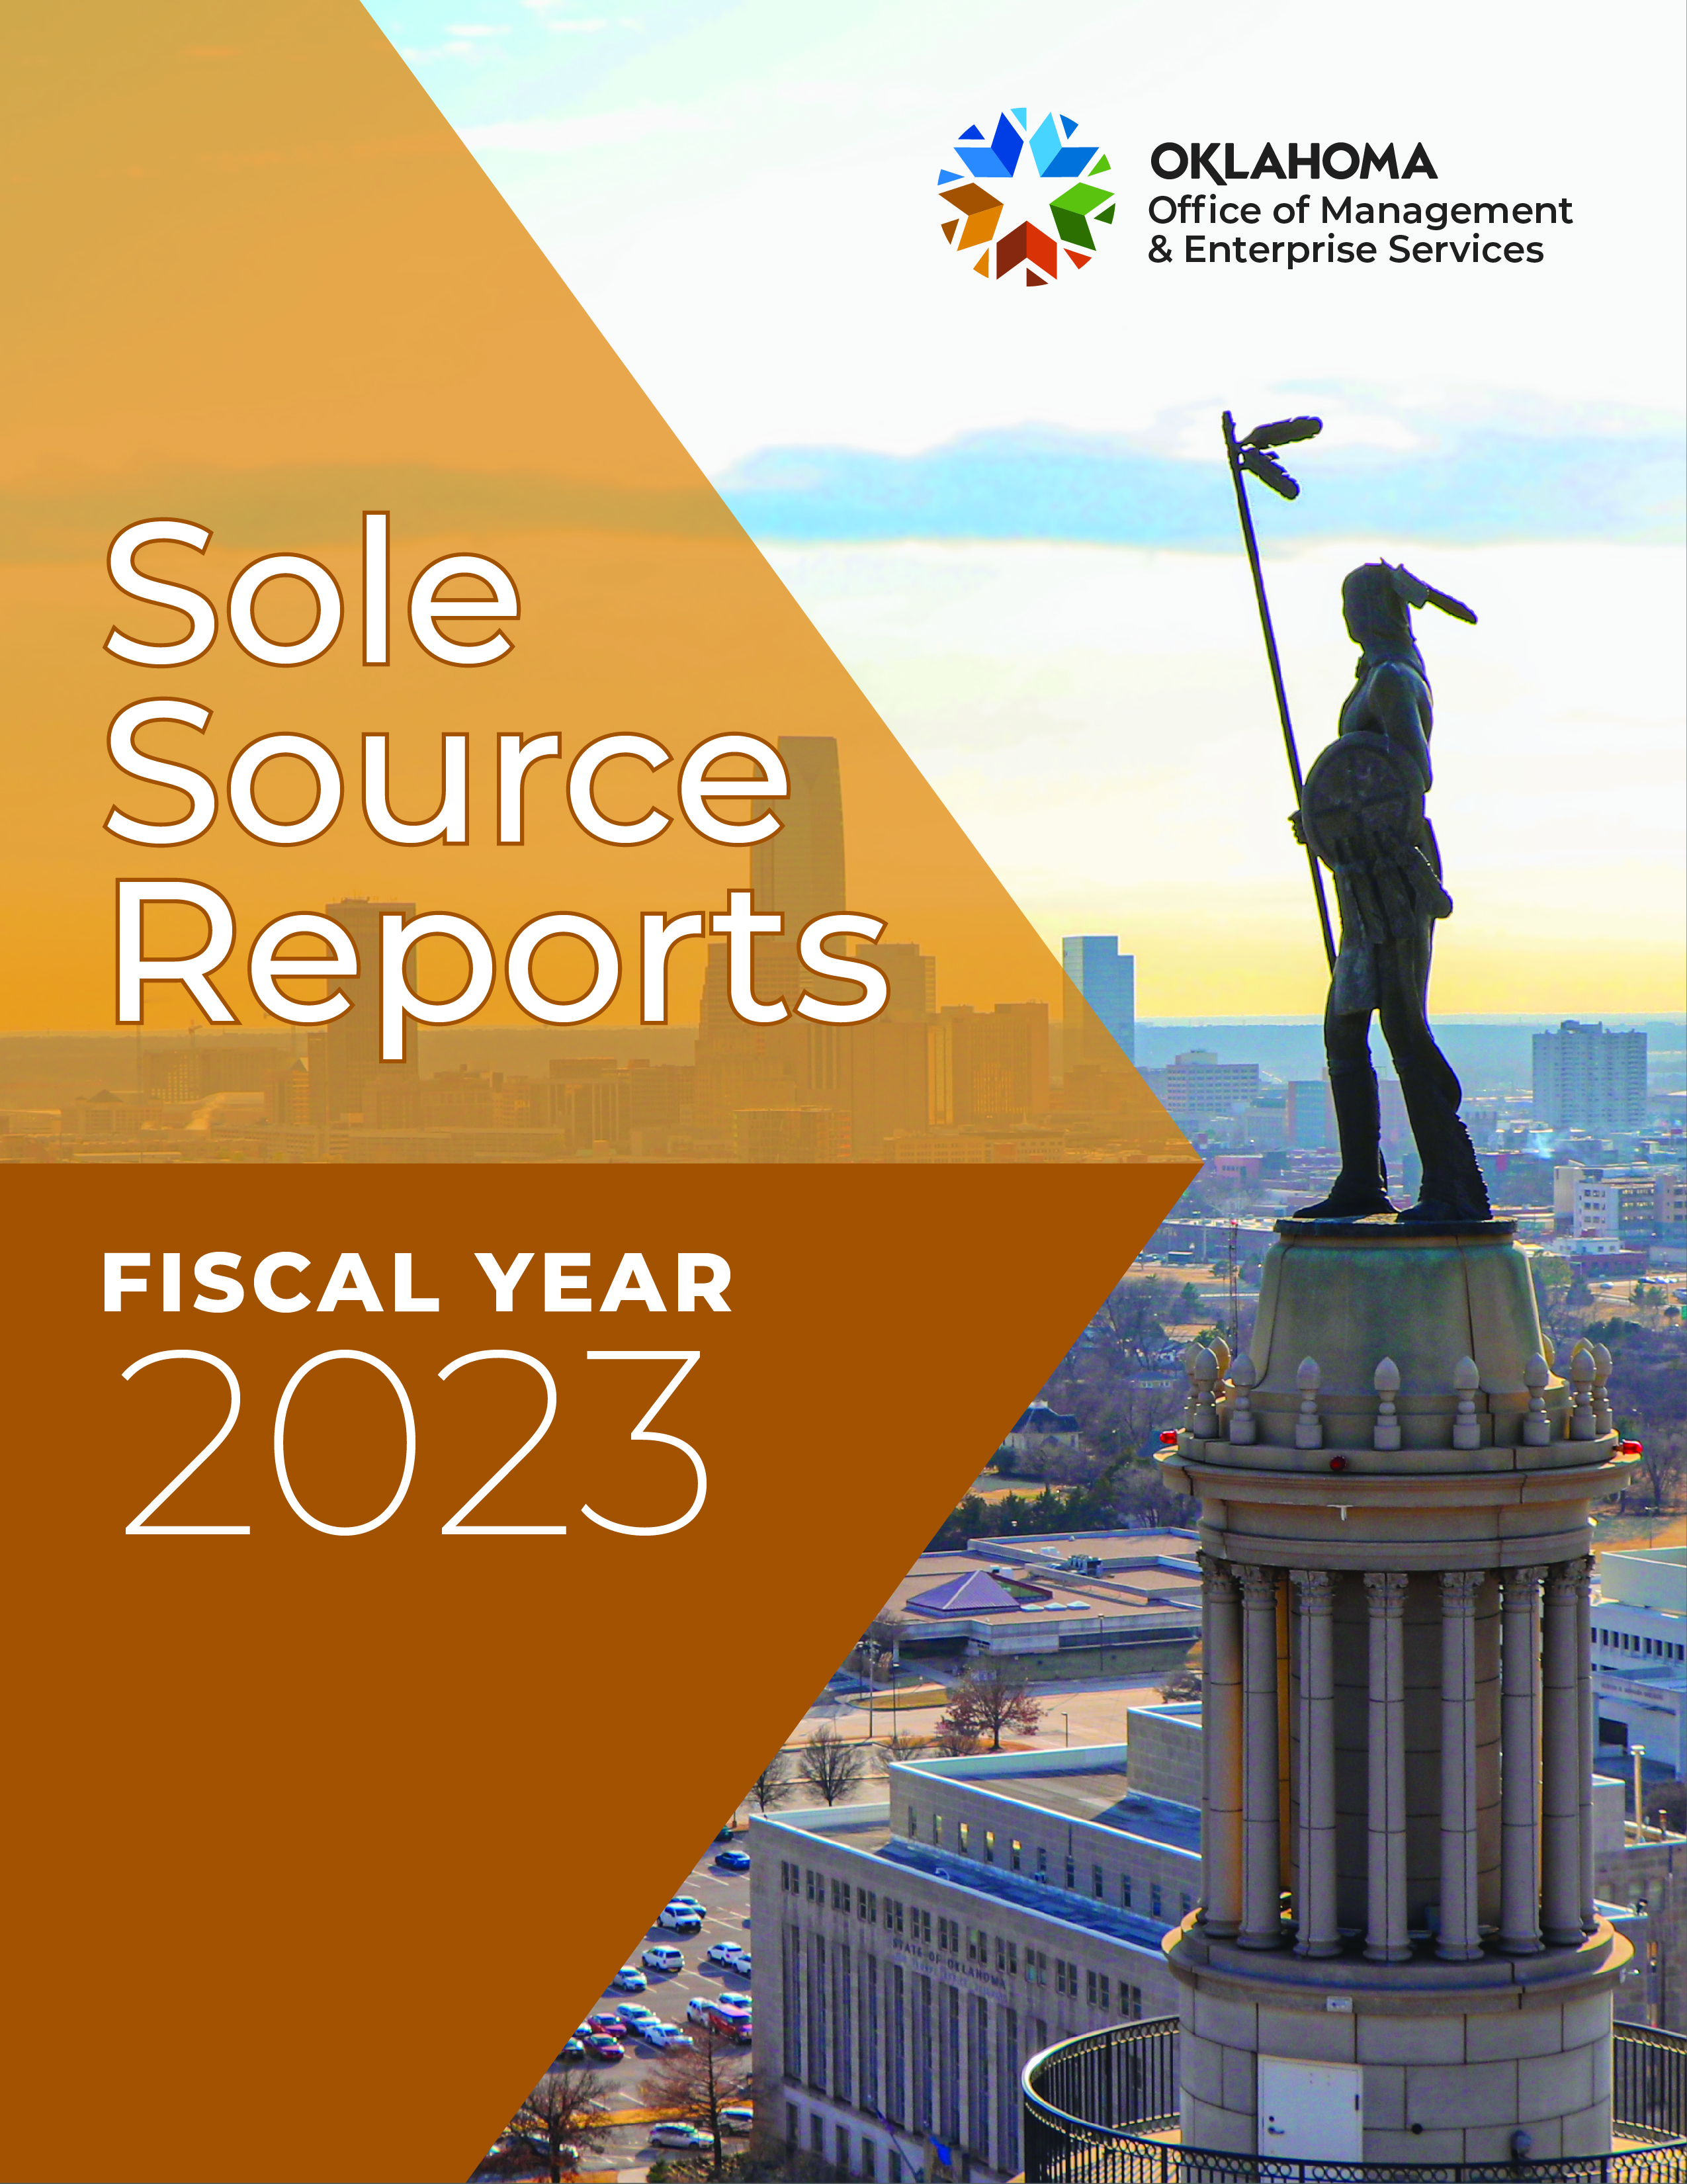 Sole Source Reports FY 2023